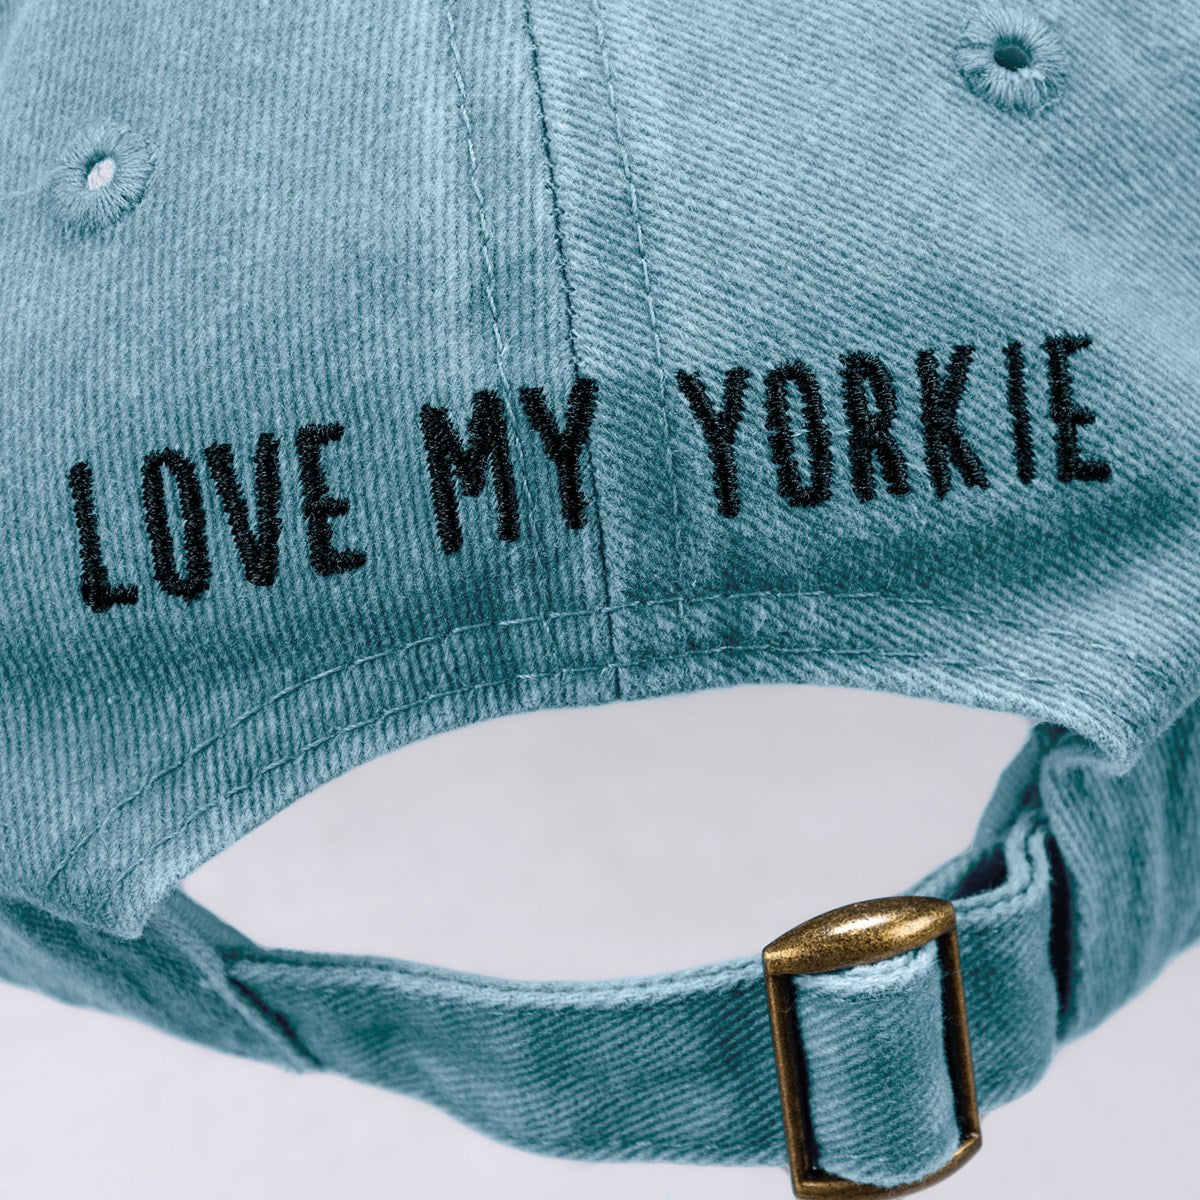 Surprise Me Sale 🤭 Love My Yorkie Embroidered Baseball Cap